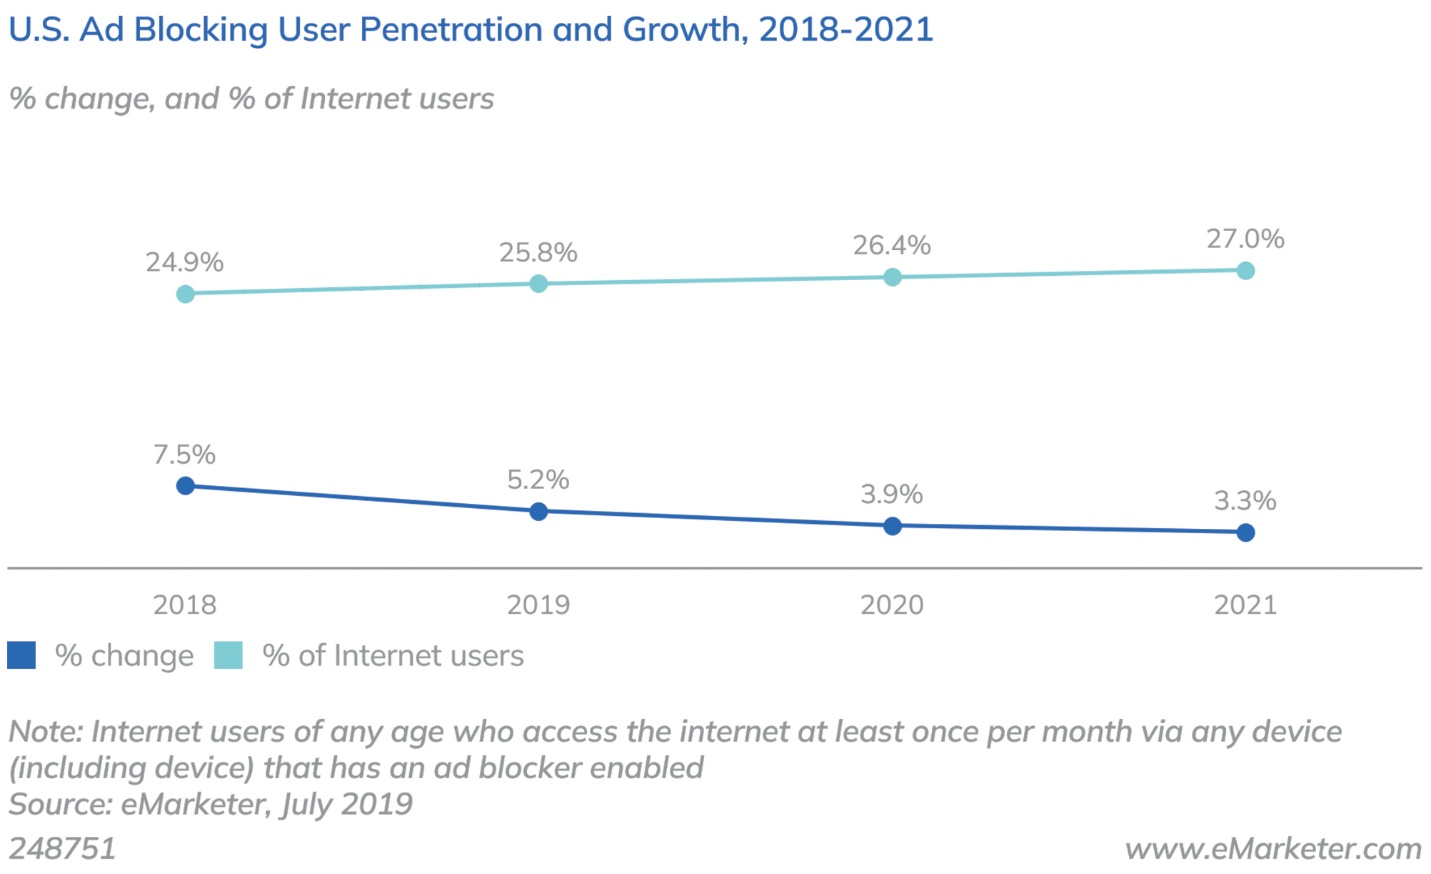 US Ad Blocking User Penetration and Growth 2018 - 2022